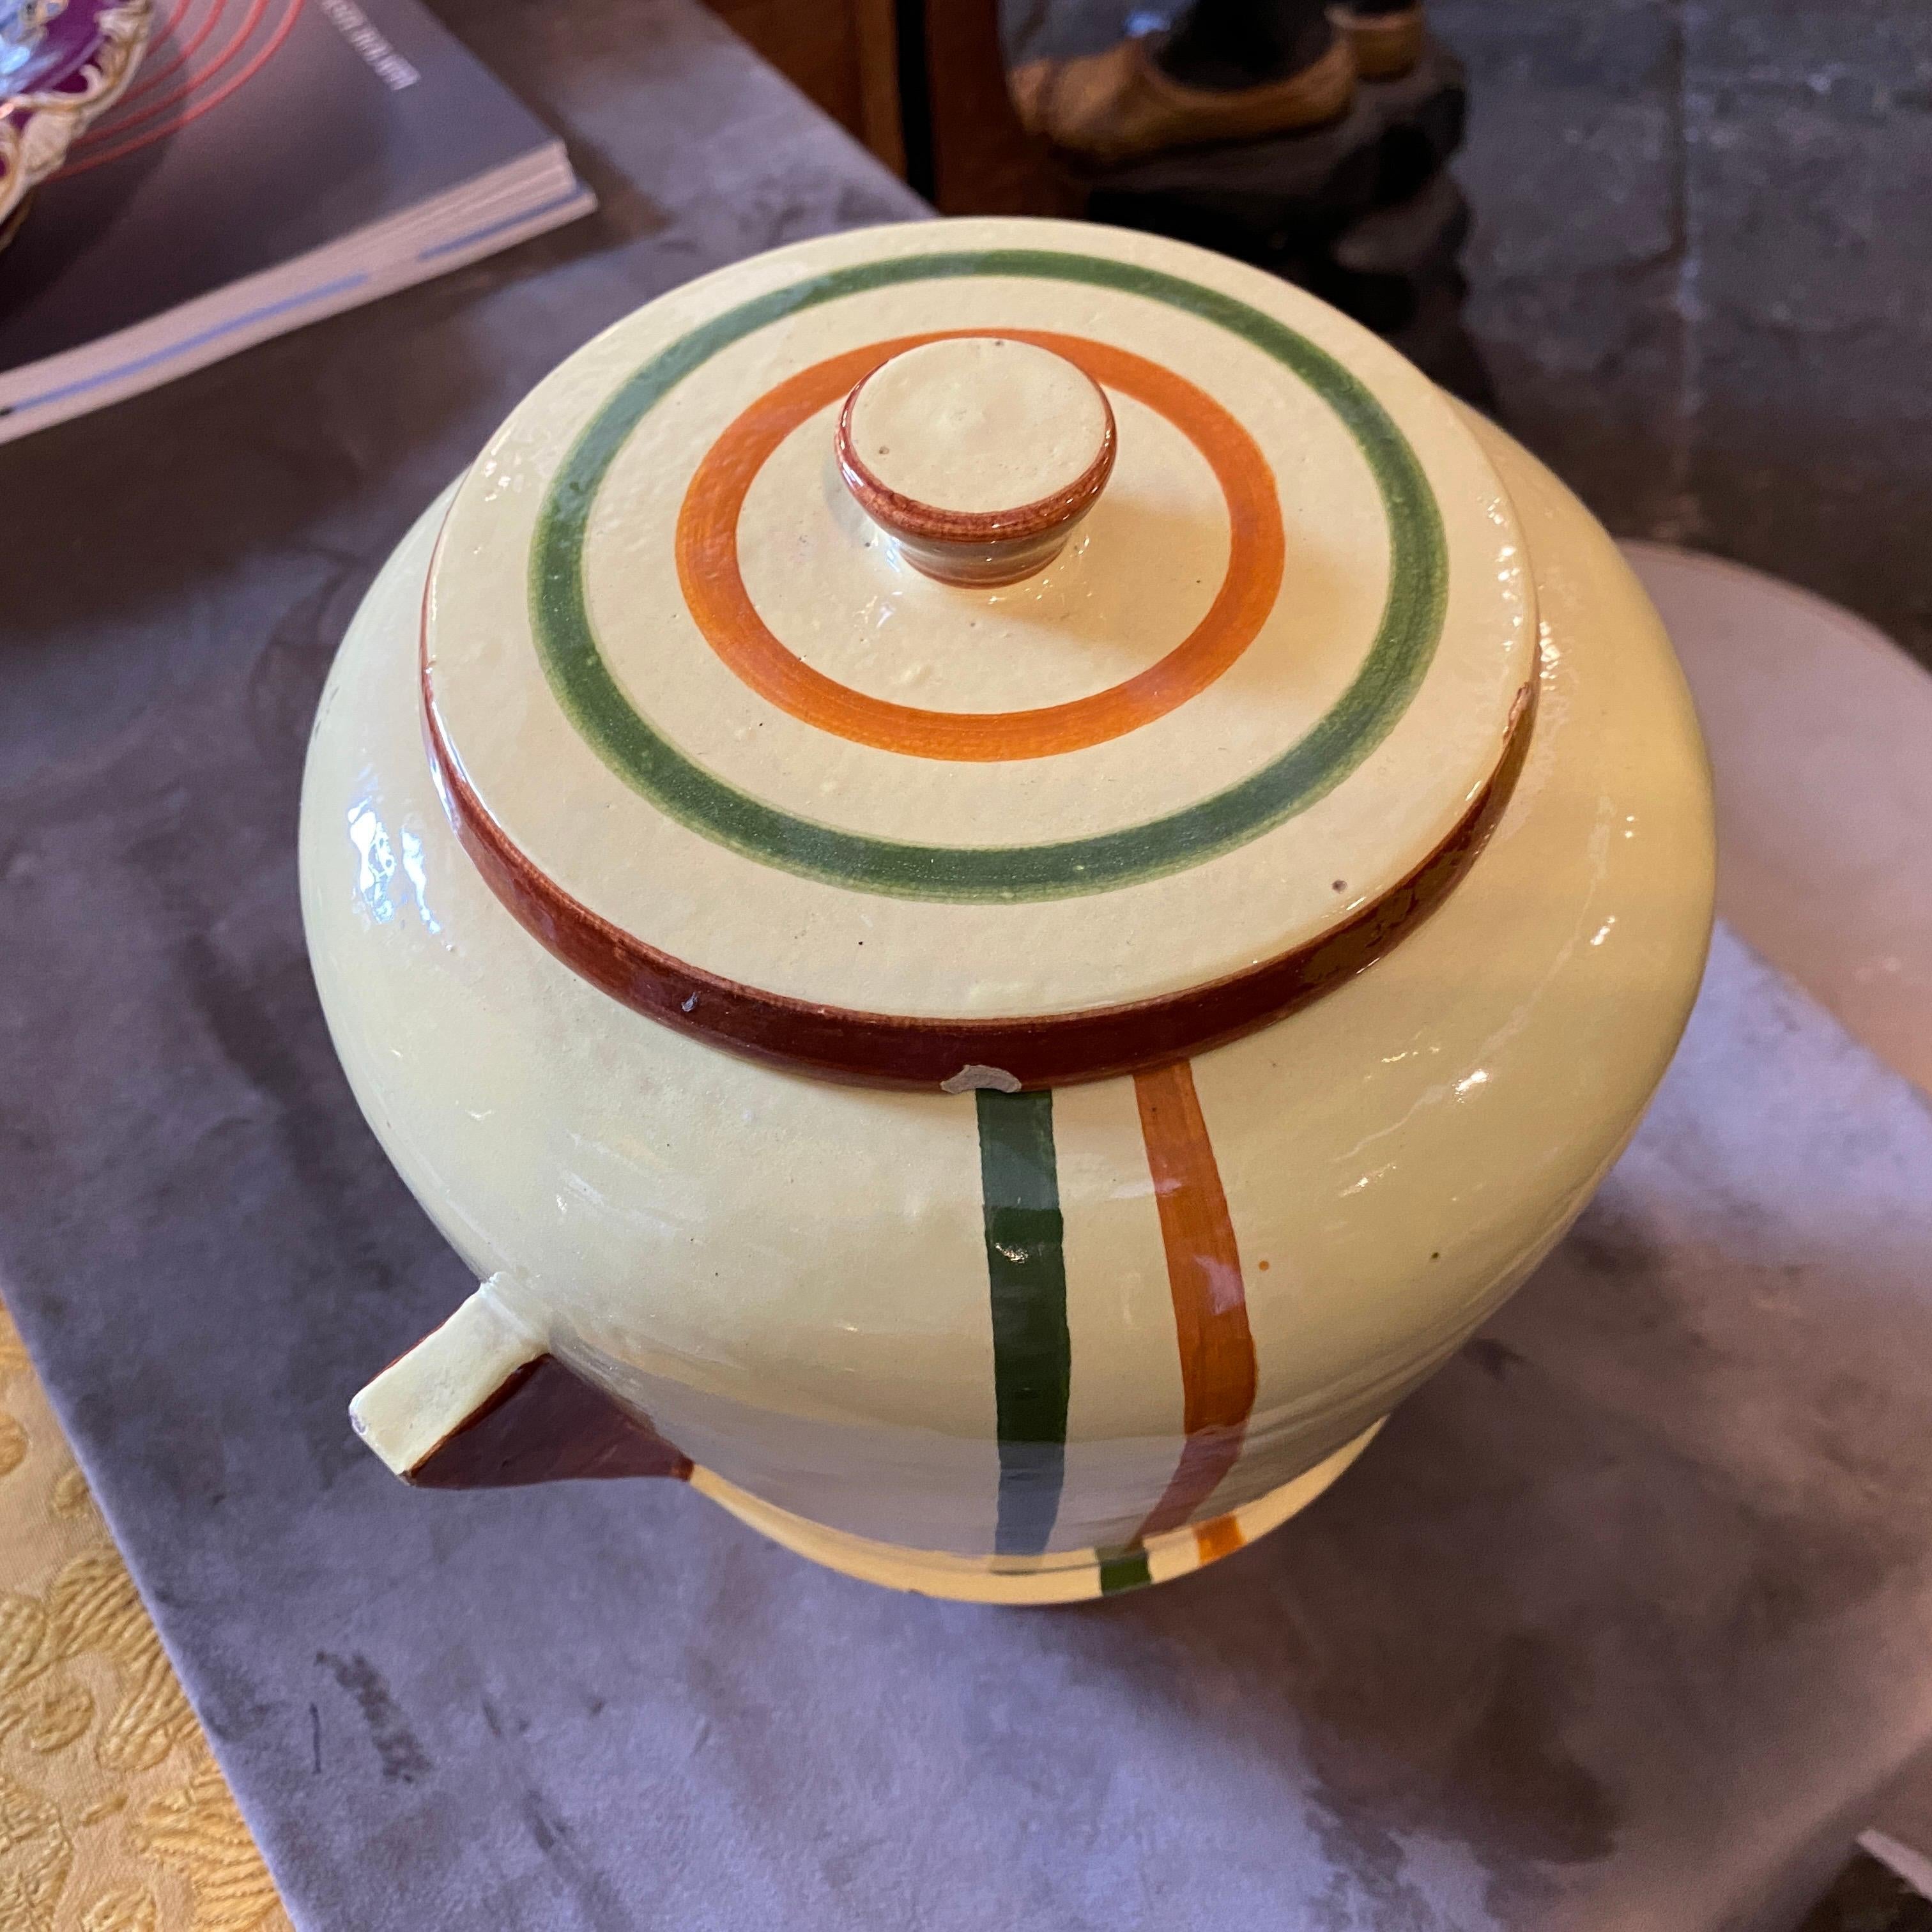 20th Century 1930s Art Deco Hand-Painted Italian Ceramic Biscuit Box by Ceramiche Faenza For Sale